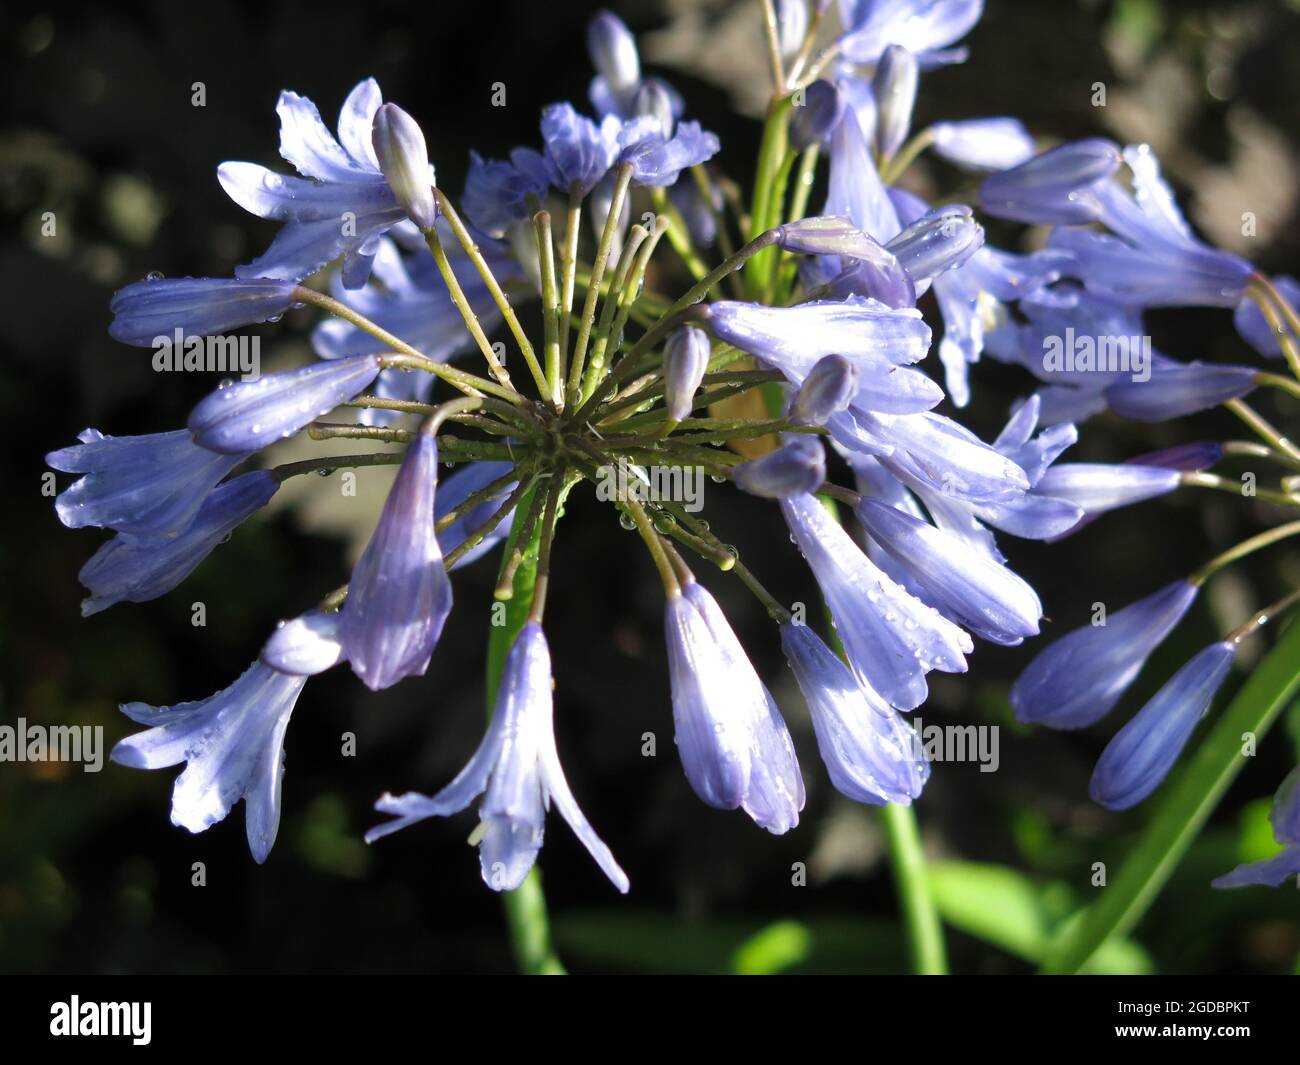 Close-up of the pale blue flowers on a head of agapanthus in full bloom, also known as Lily of the Nile or African Lily. Stock Photo